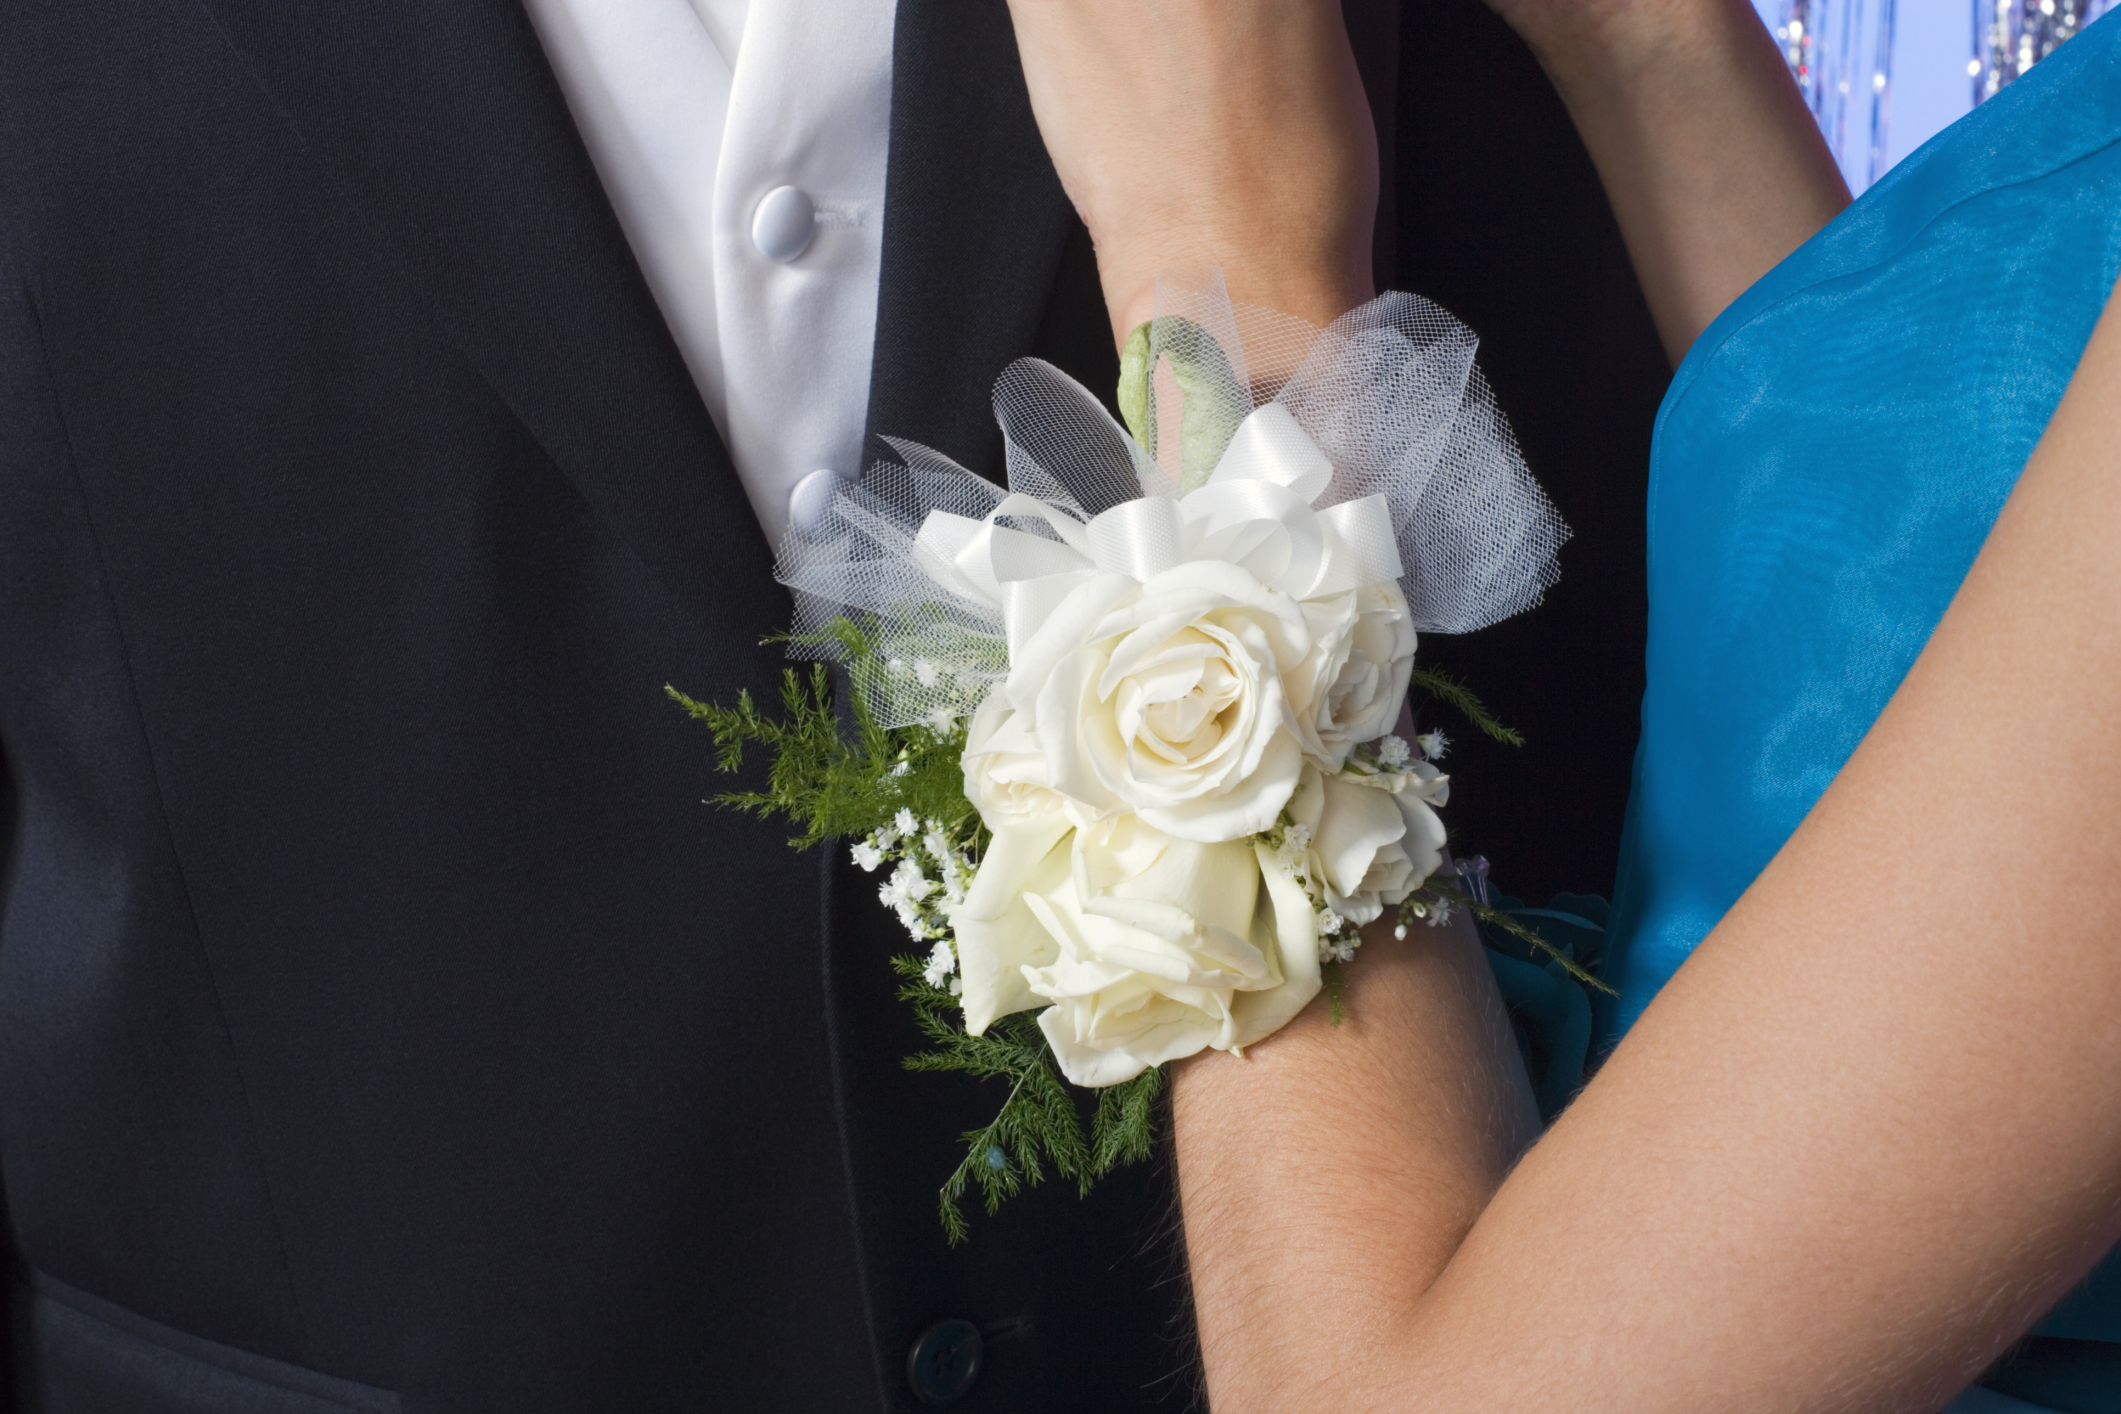 She's Crafty: How to make a DIY Corsage